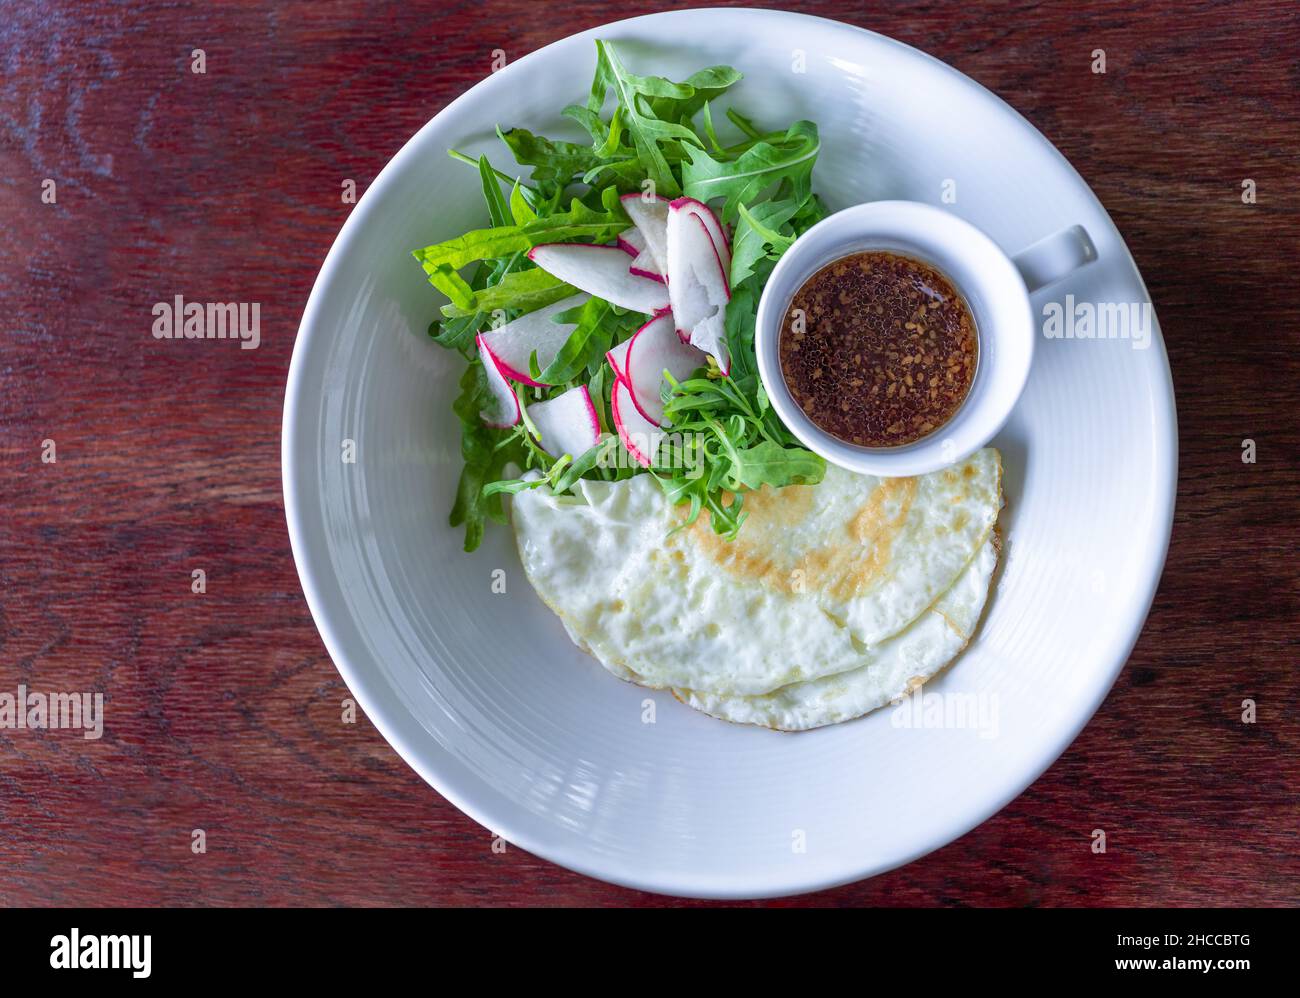 Fried egg white with salad and sesame balsamic dressing healthy breakfast Stock Photo